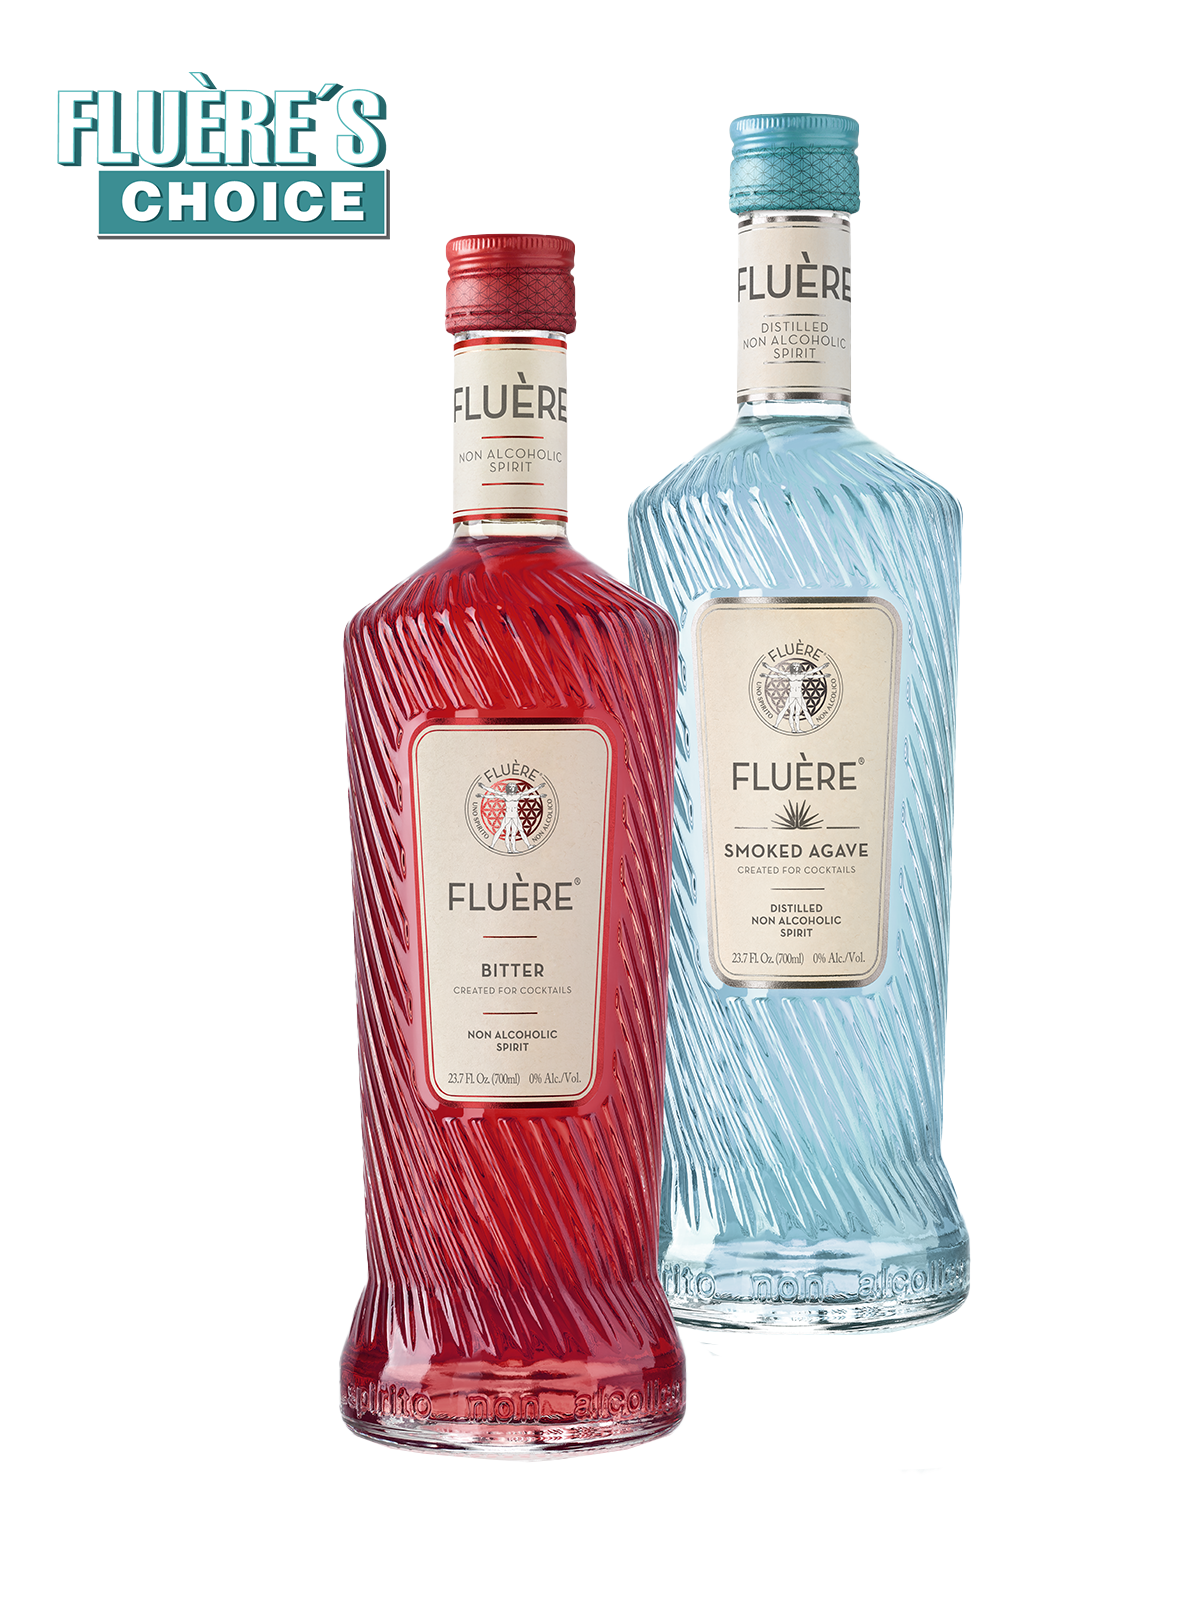 Fluère´s Choice: Bitter & Smoked Agave